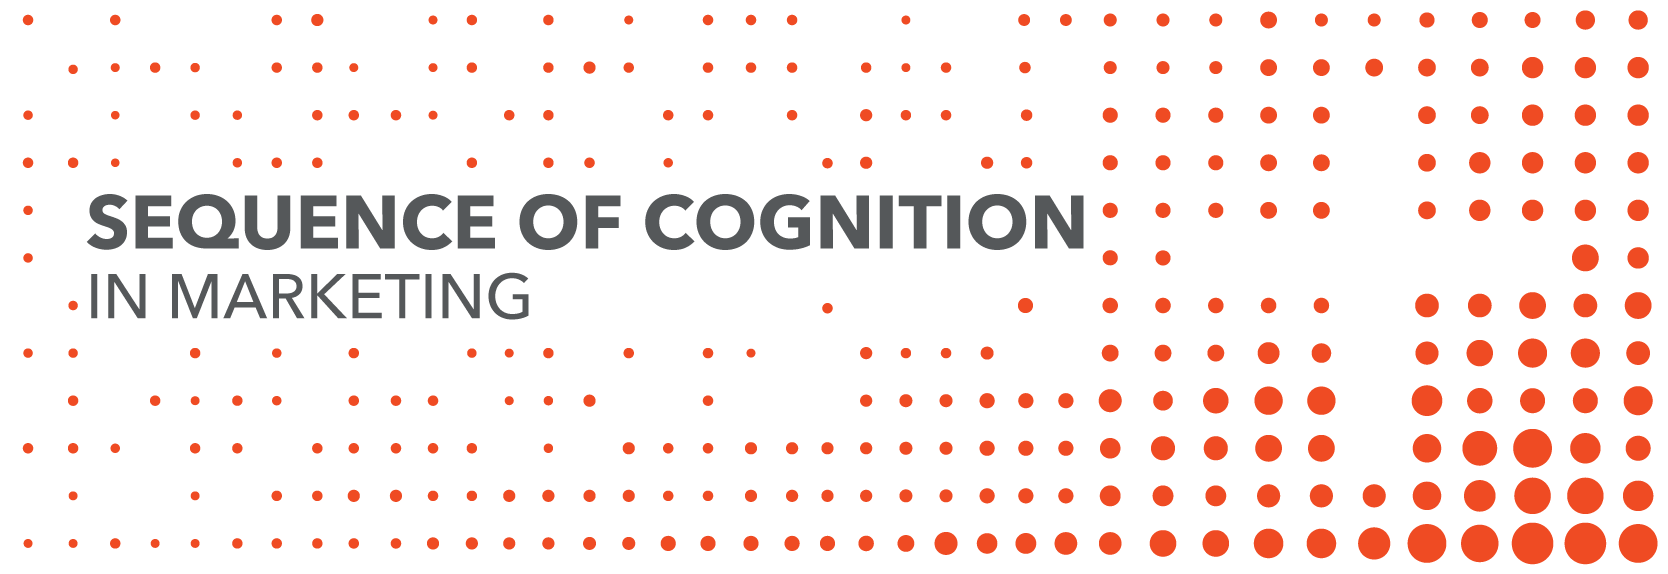 sequence of cognition in marketing